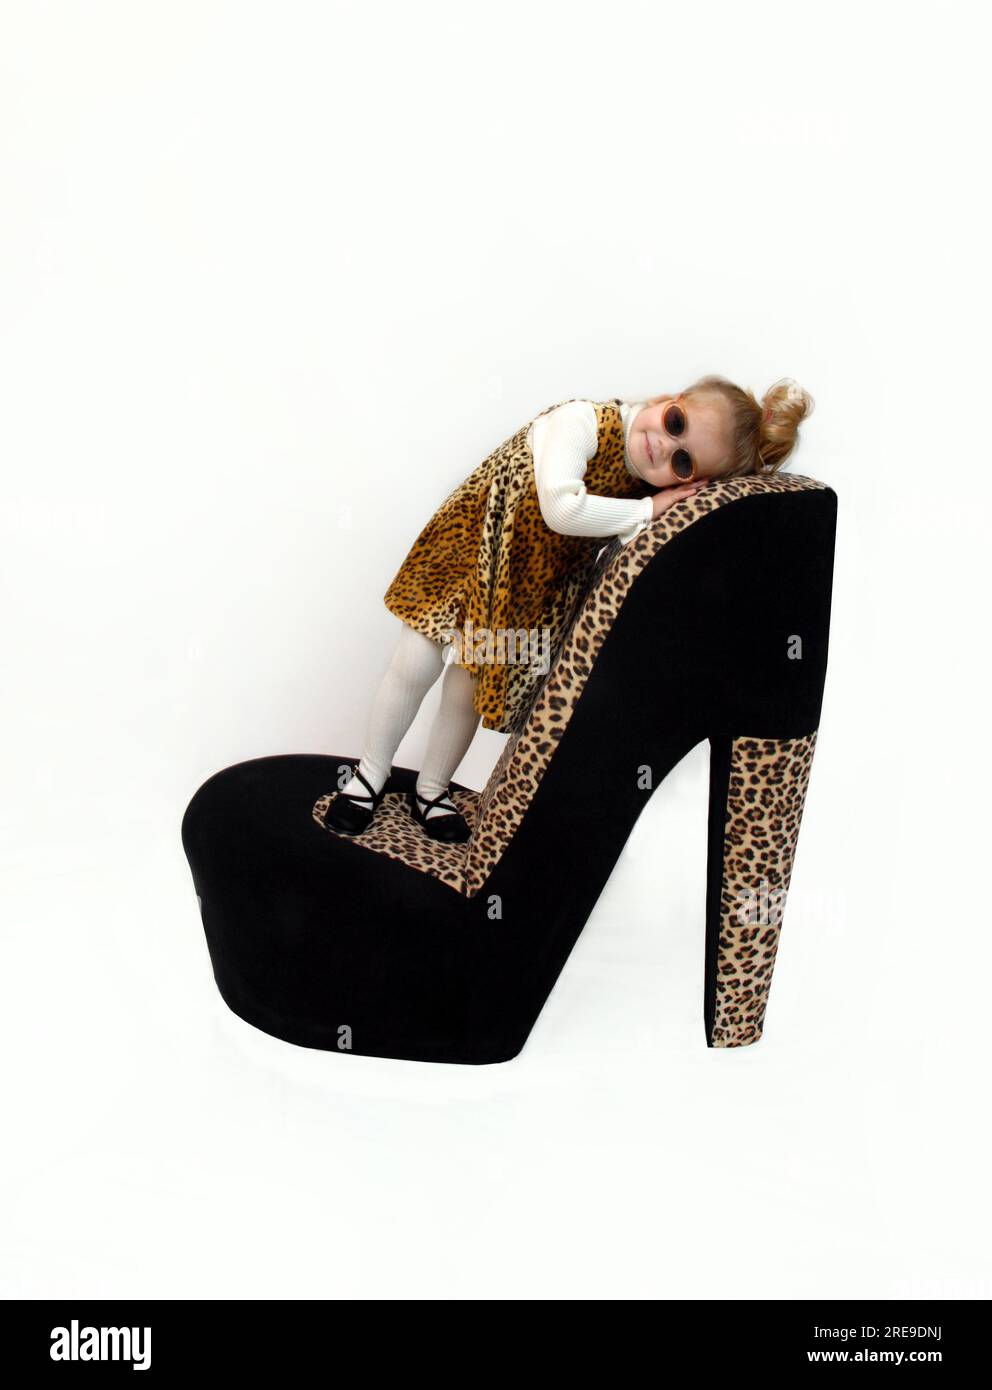 Little Girl models an animal print jumper and tights.  She has on sunglasses and is standing on a giant high heel shoe. Stock Photo